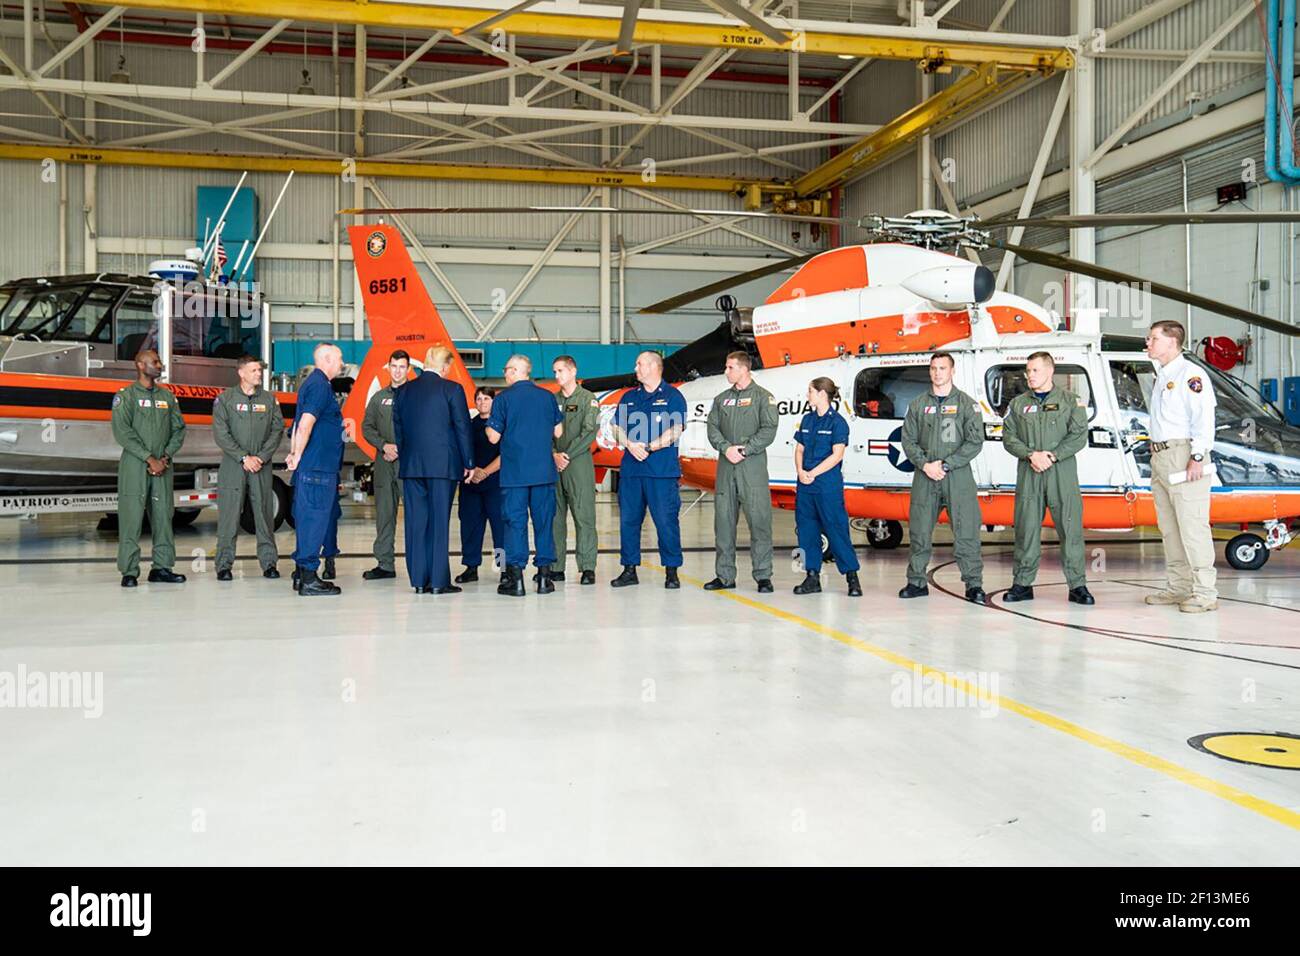 President Donald Trump meets with U.S. Coast Guard personnel during his briefing on Tropical Storm Imelda Sunday Sept. 22 2019 at the U.S. Coast Guard Hangar in Houston Texas. Stock Photo